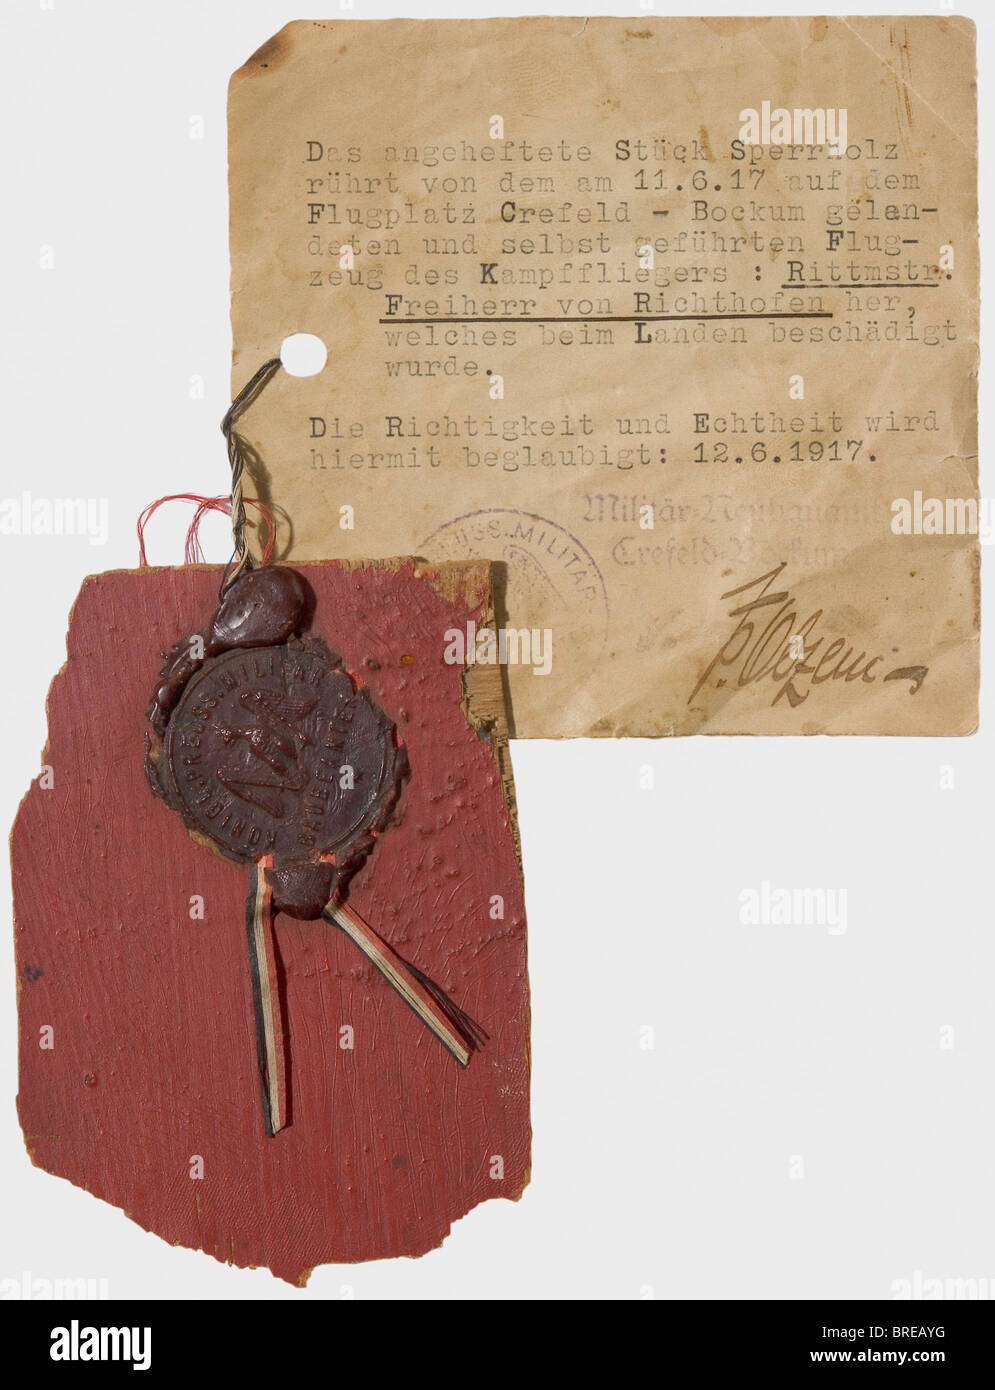 Manfred Freiherr von Richthofen (1892 - 1918), a fragment of the body of an Albatros D V Three-layered plywood, size ca. 72 x 102 mm, painted red on one side, clear coat on the reverse. Attached with sealing wax a typewritten label bearing the inscription (transl.) 'the piece of plywood at hand comes from the aircraft, which landed on 11.6.17 on Crefeld-Bockum airfield. It was flown by combat pilot Cavalry Captain Freiherr von Richthofen and was damaged during the landing manoeuvre. The verification and authenticity is confirmed herewith: 12.6.1917.' With a sta, Stock Photo